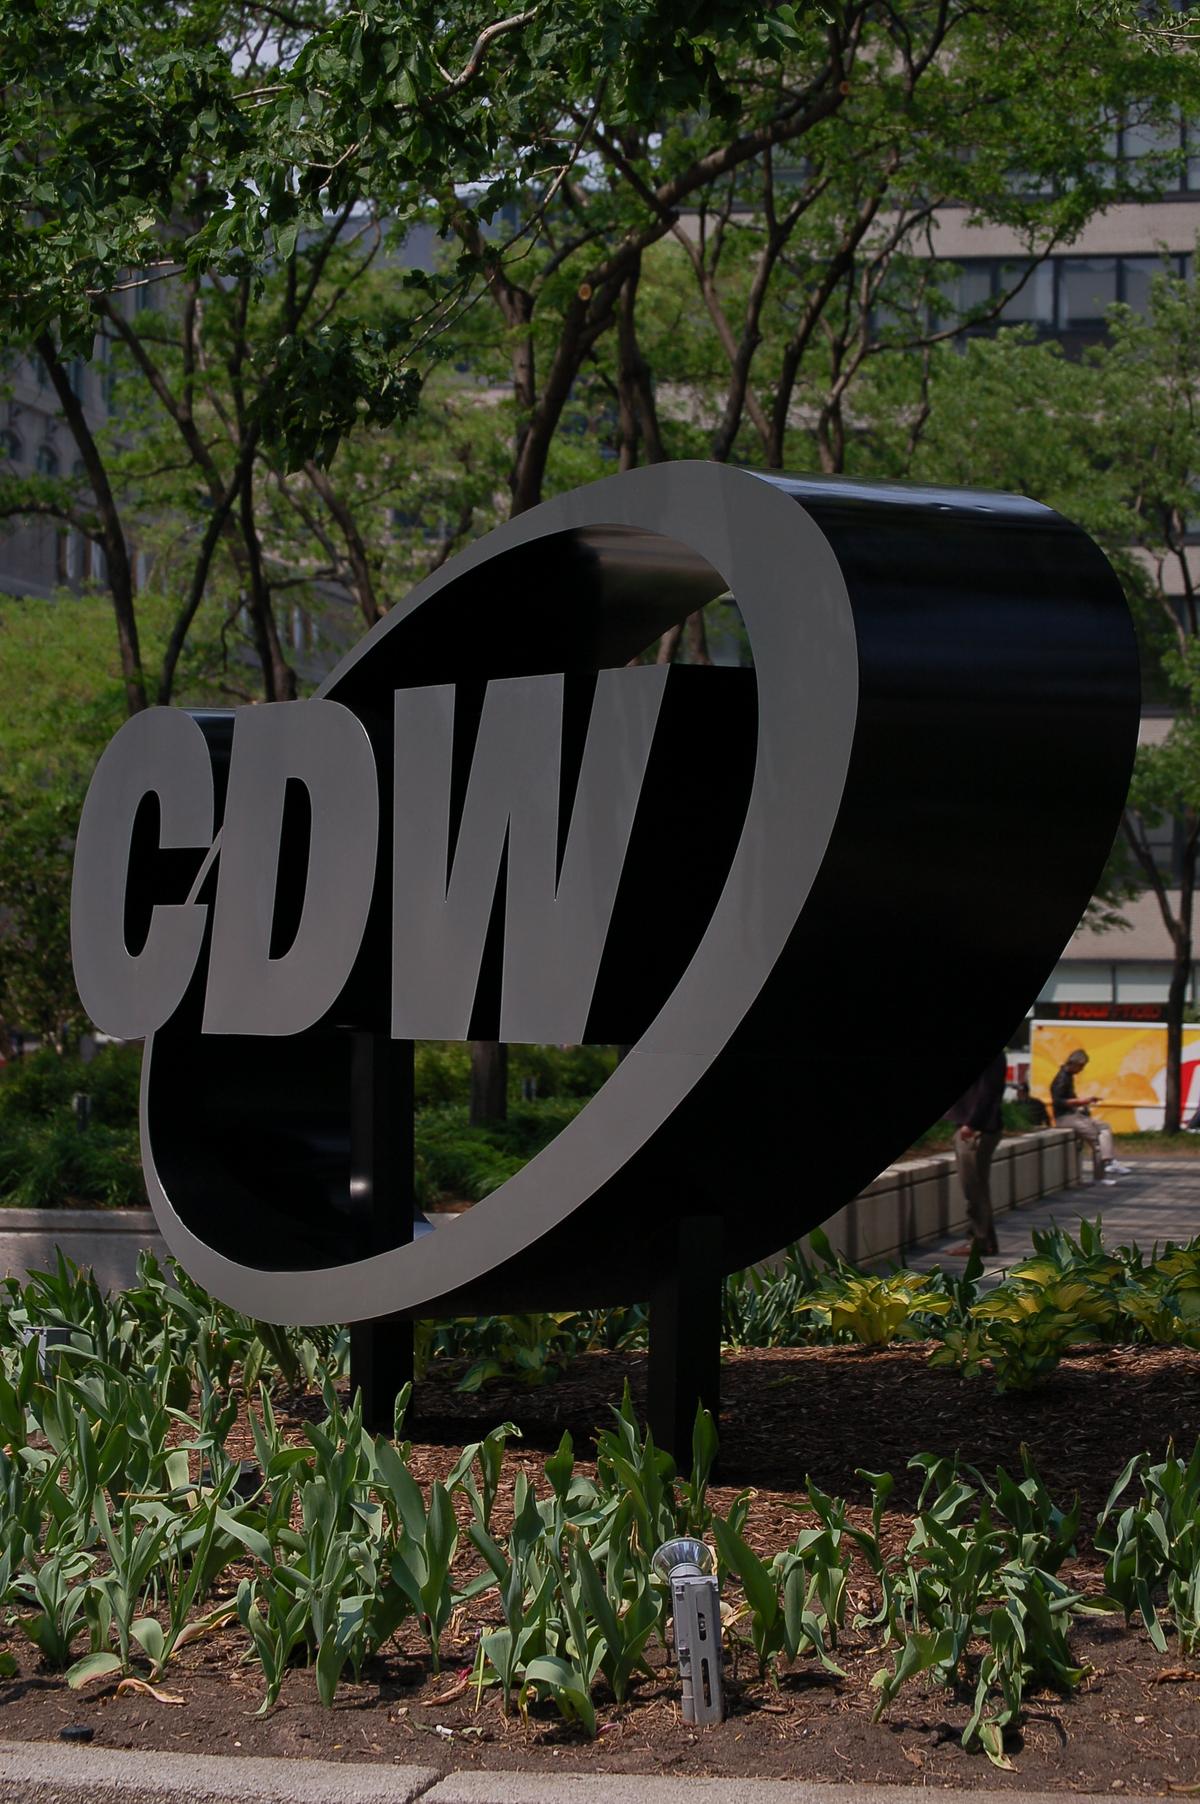 CDW plans to go public this year report Chicago Business Journal